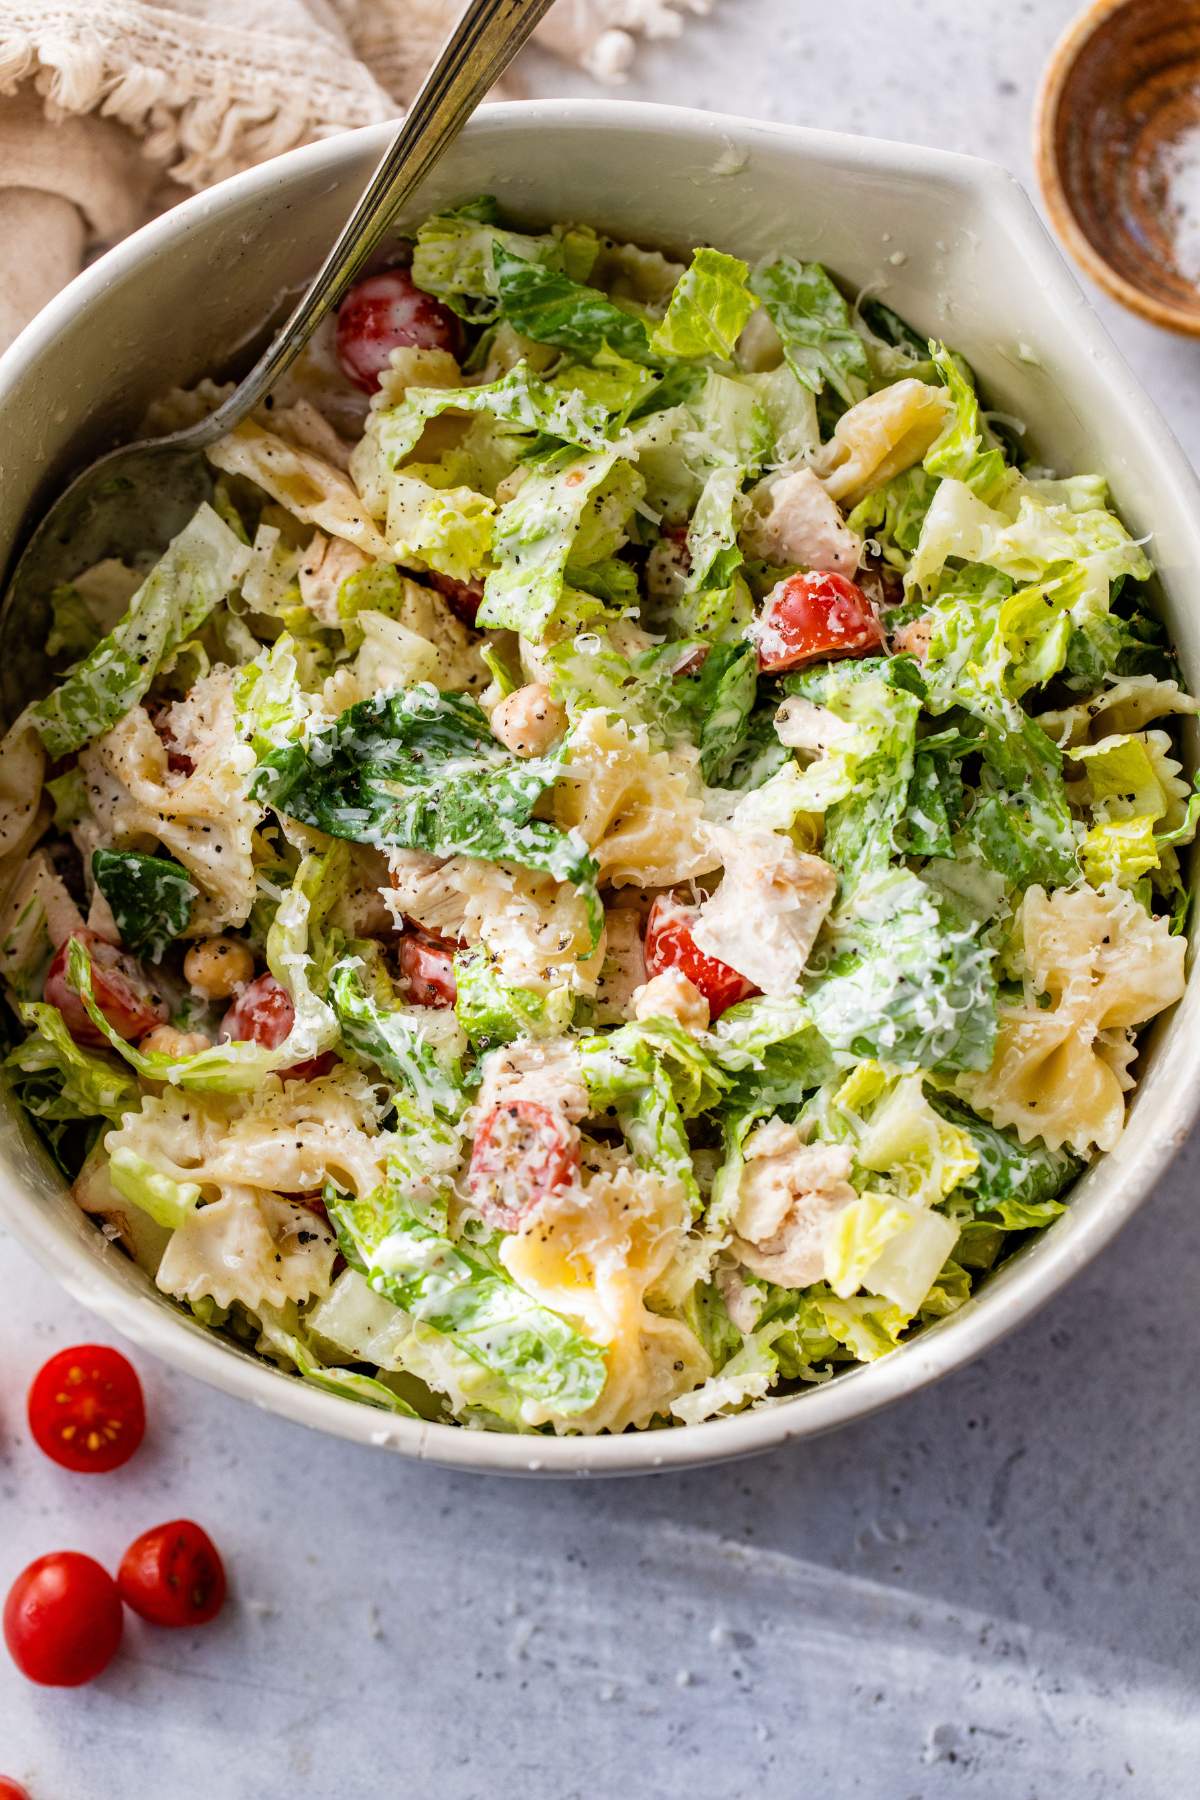 Large bowl filled with romaine lettuce, tomatoes, and bowtie pasta.